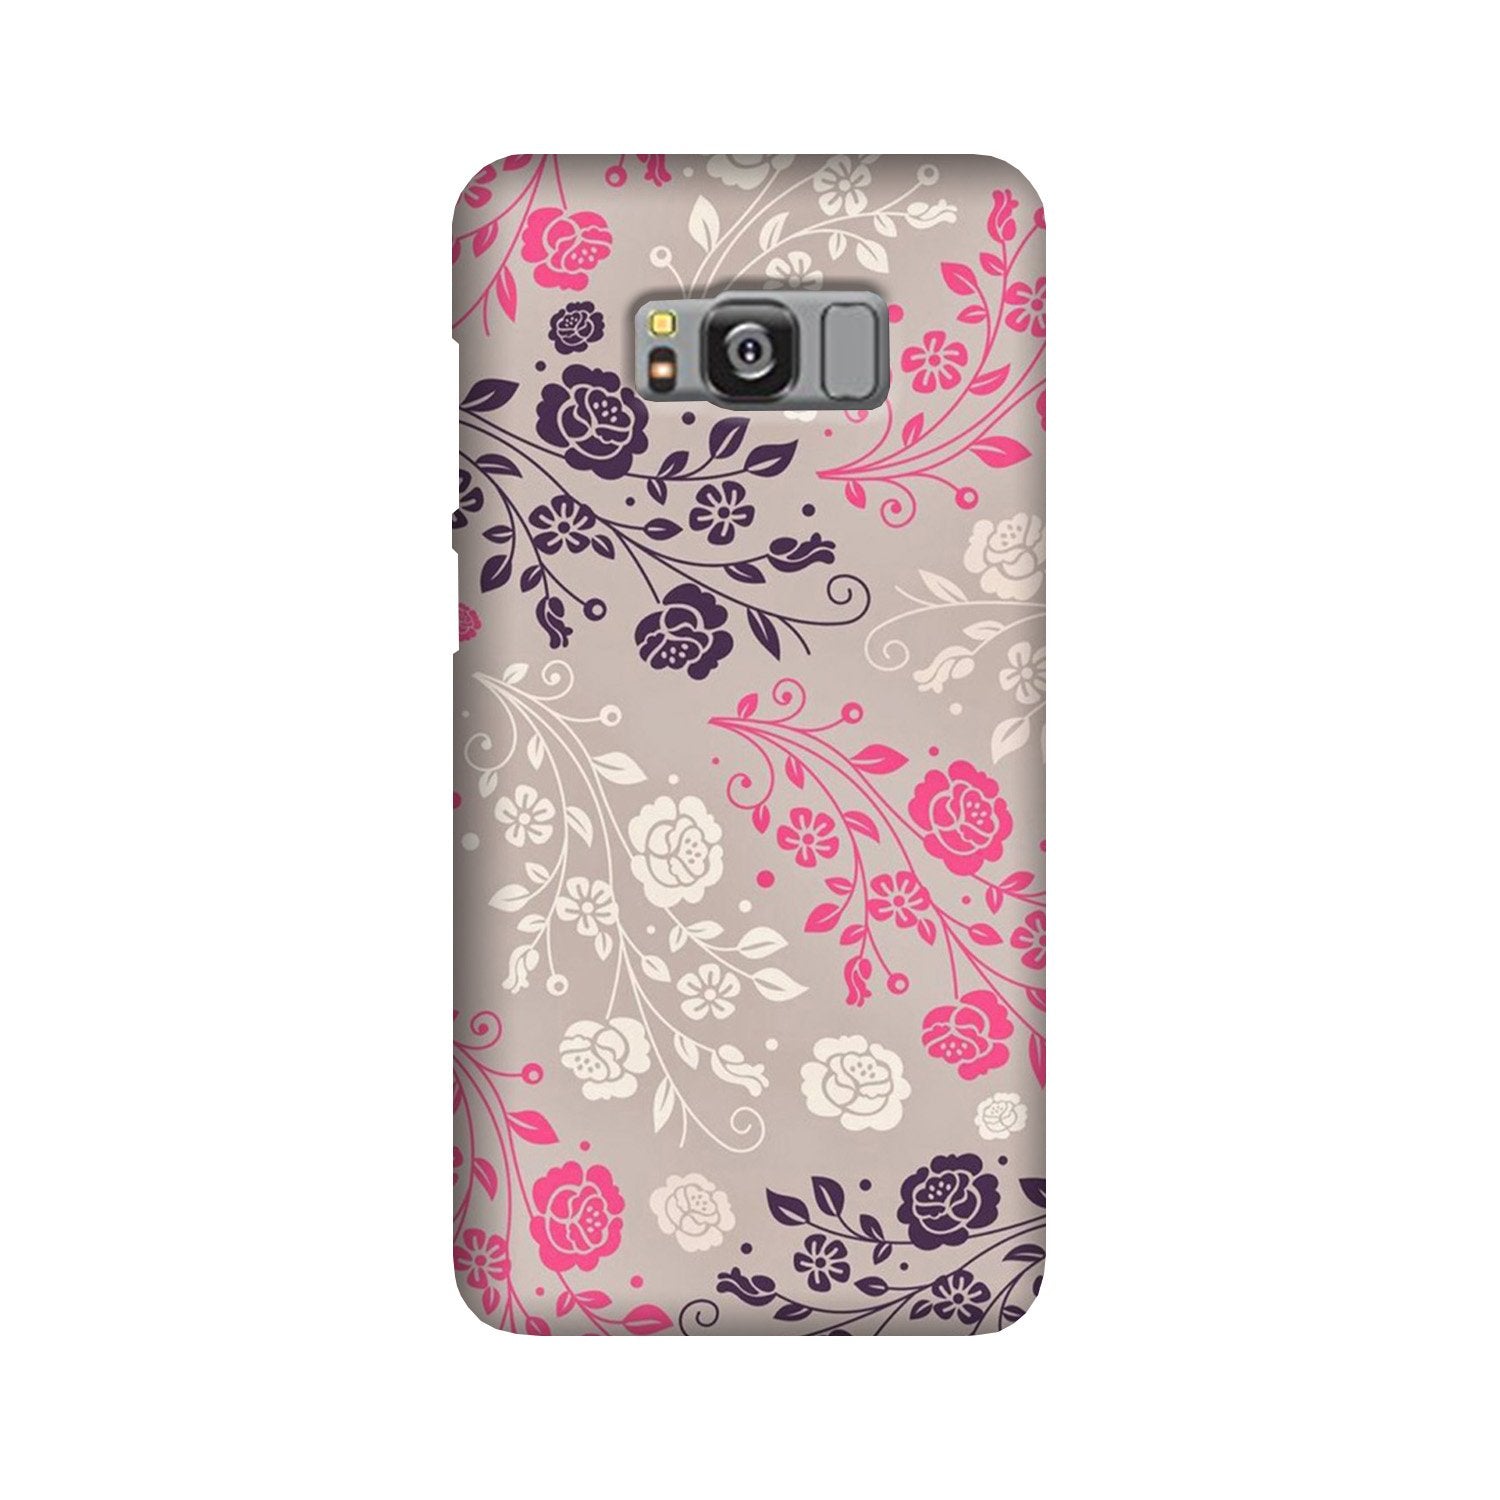 Pattern2 Case for Galaxy S8